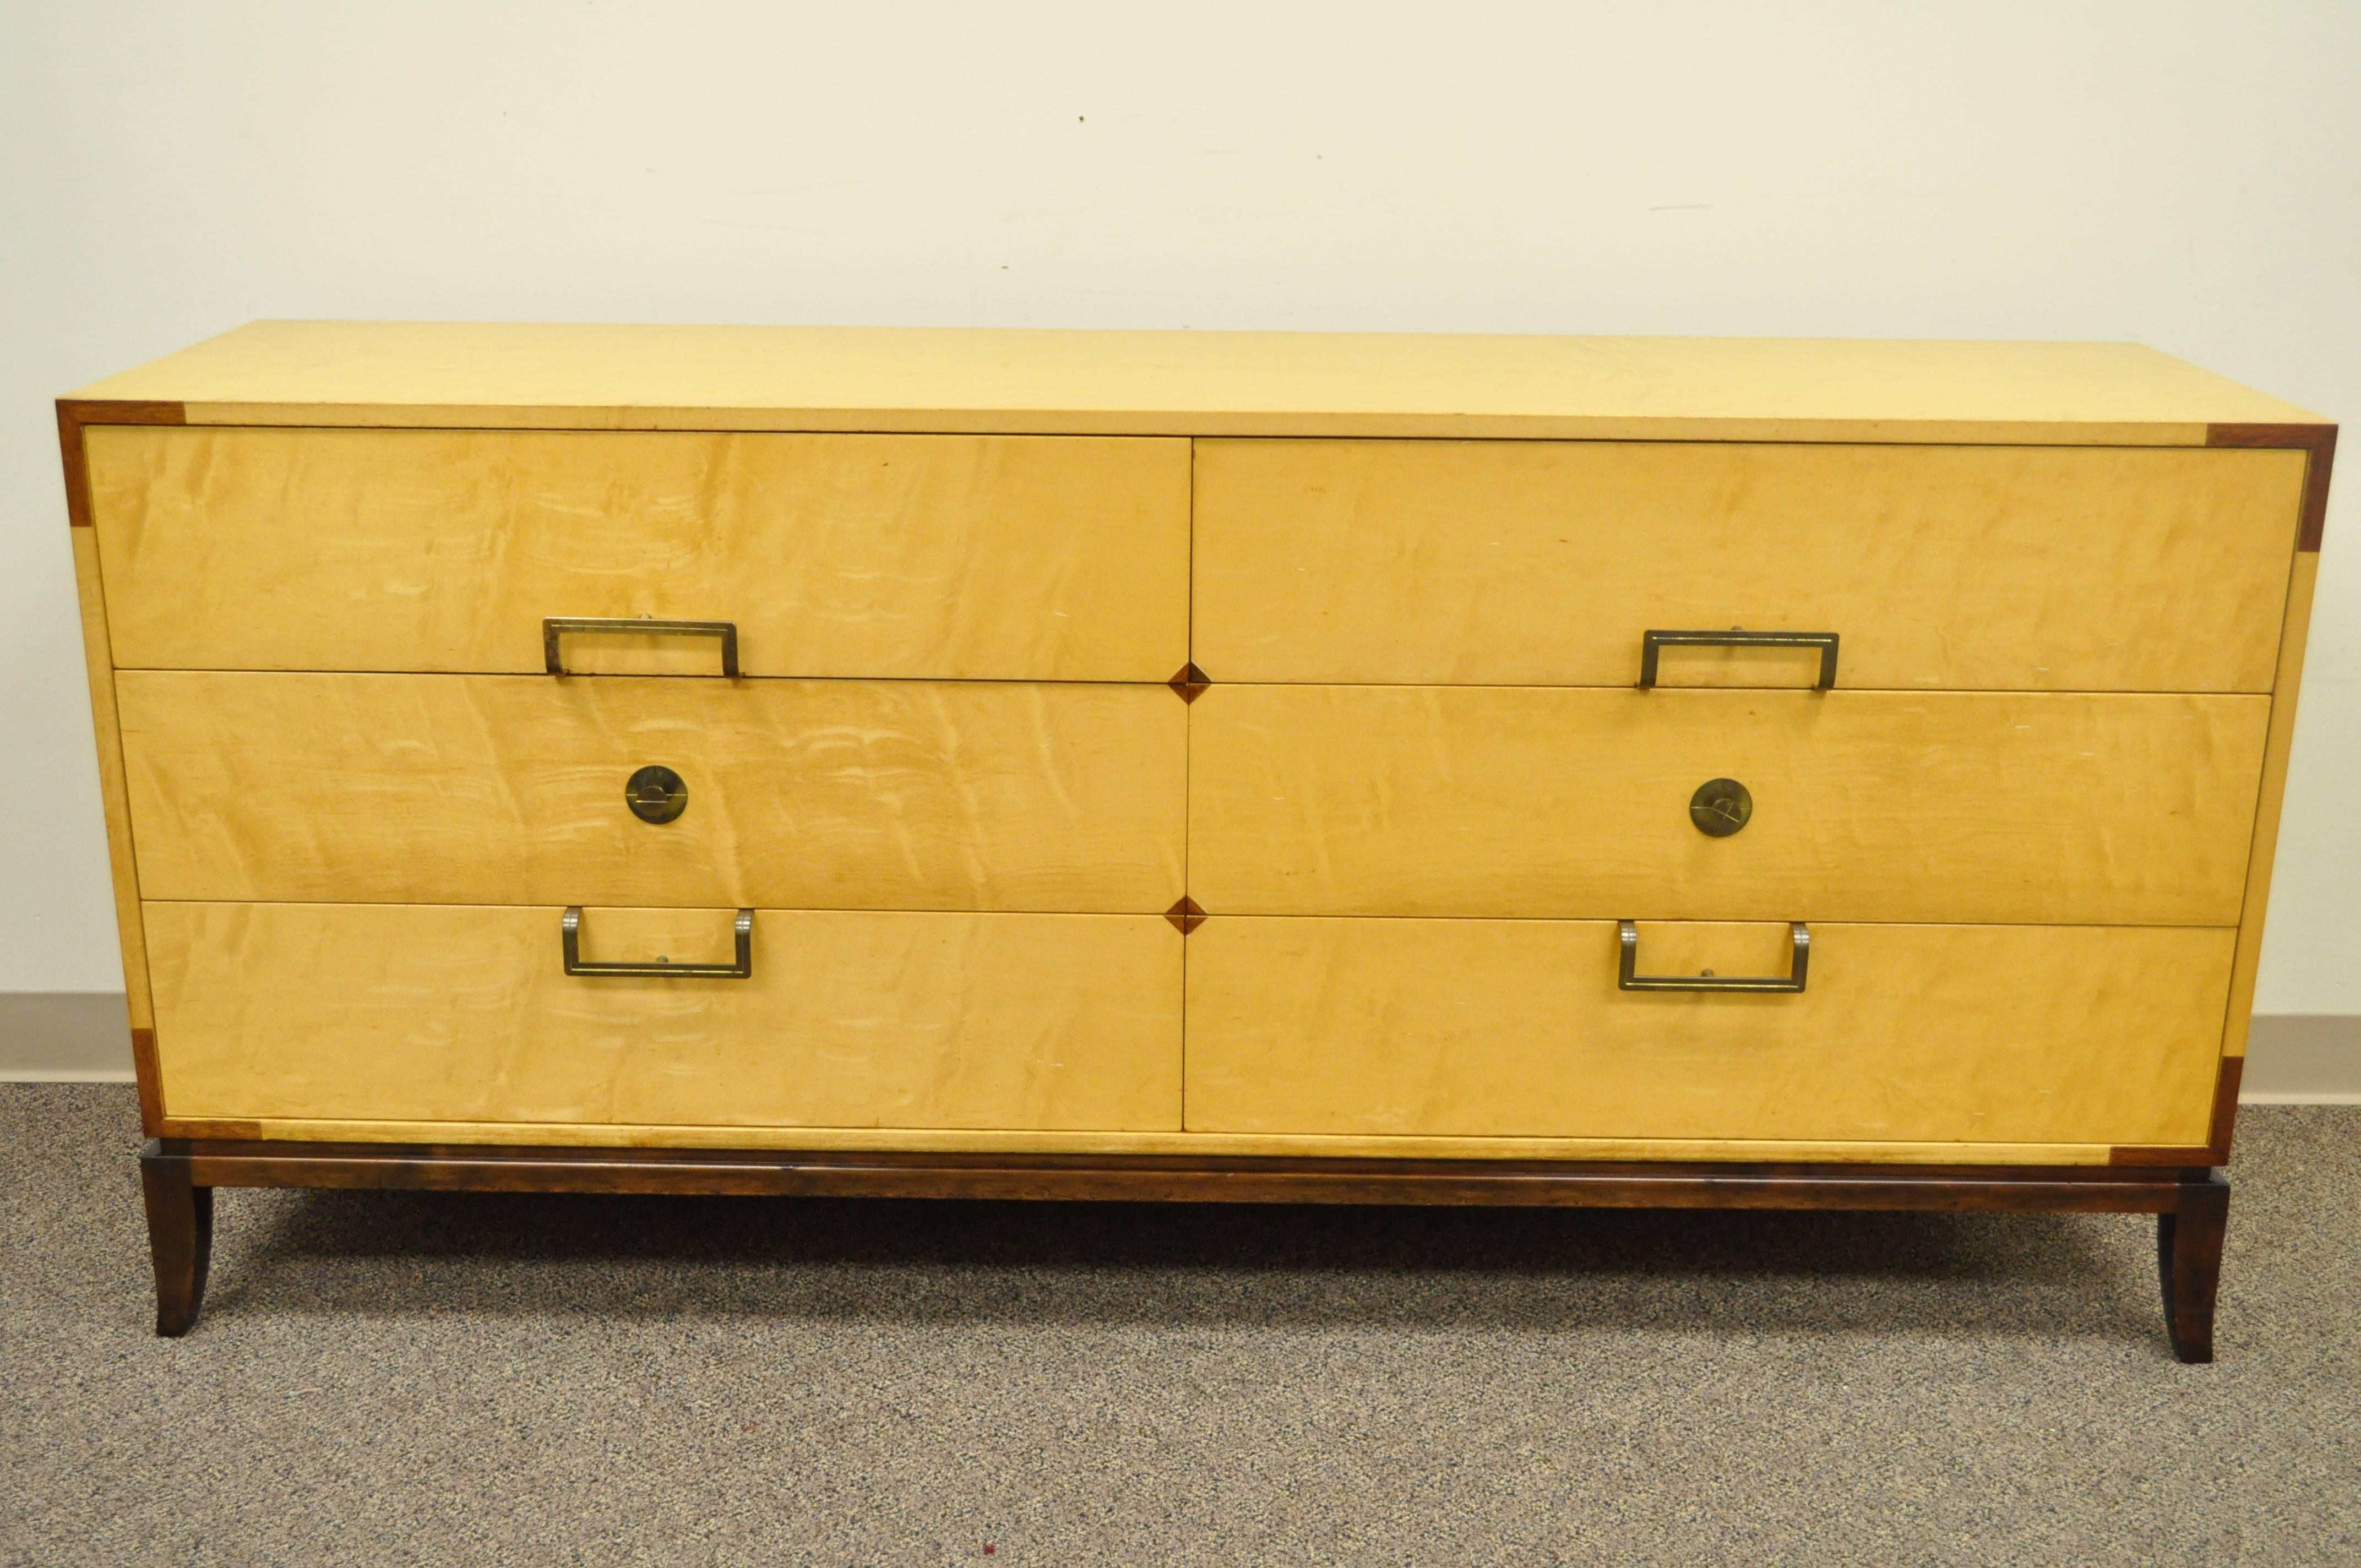 Rare Mid-Century Modern Tommi Parzinger for Parzinger Originals Maple and Mahogany Inlaid Dresser / Credenza. Item features six dovetail constructed drawers, mahogany plinth, brass Parzinger hardware and inlaid mahogany accents.